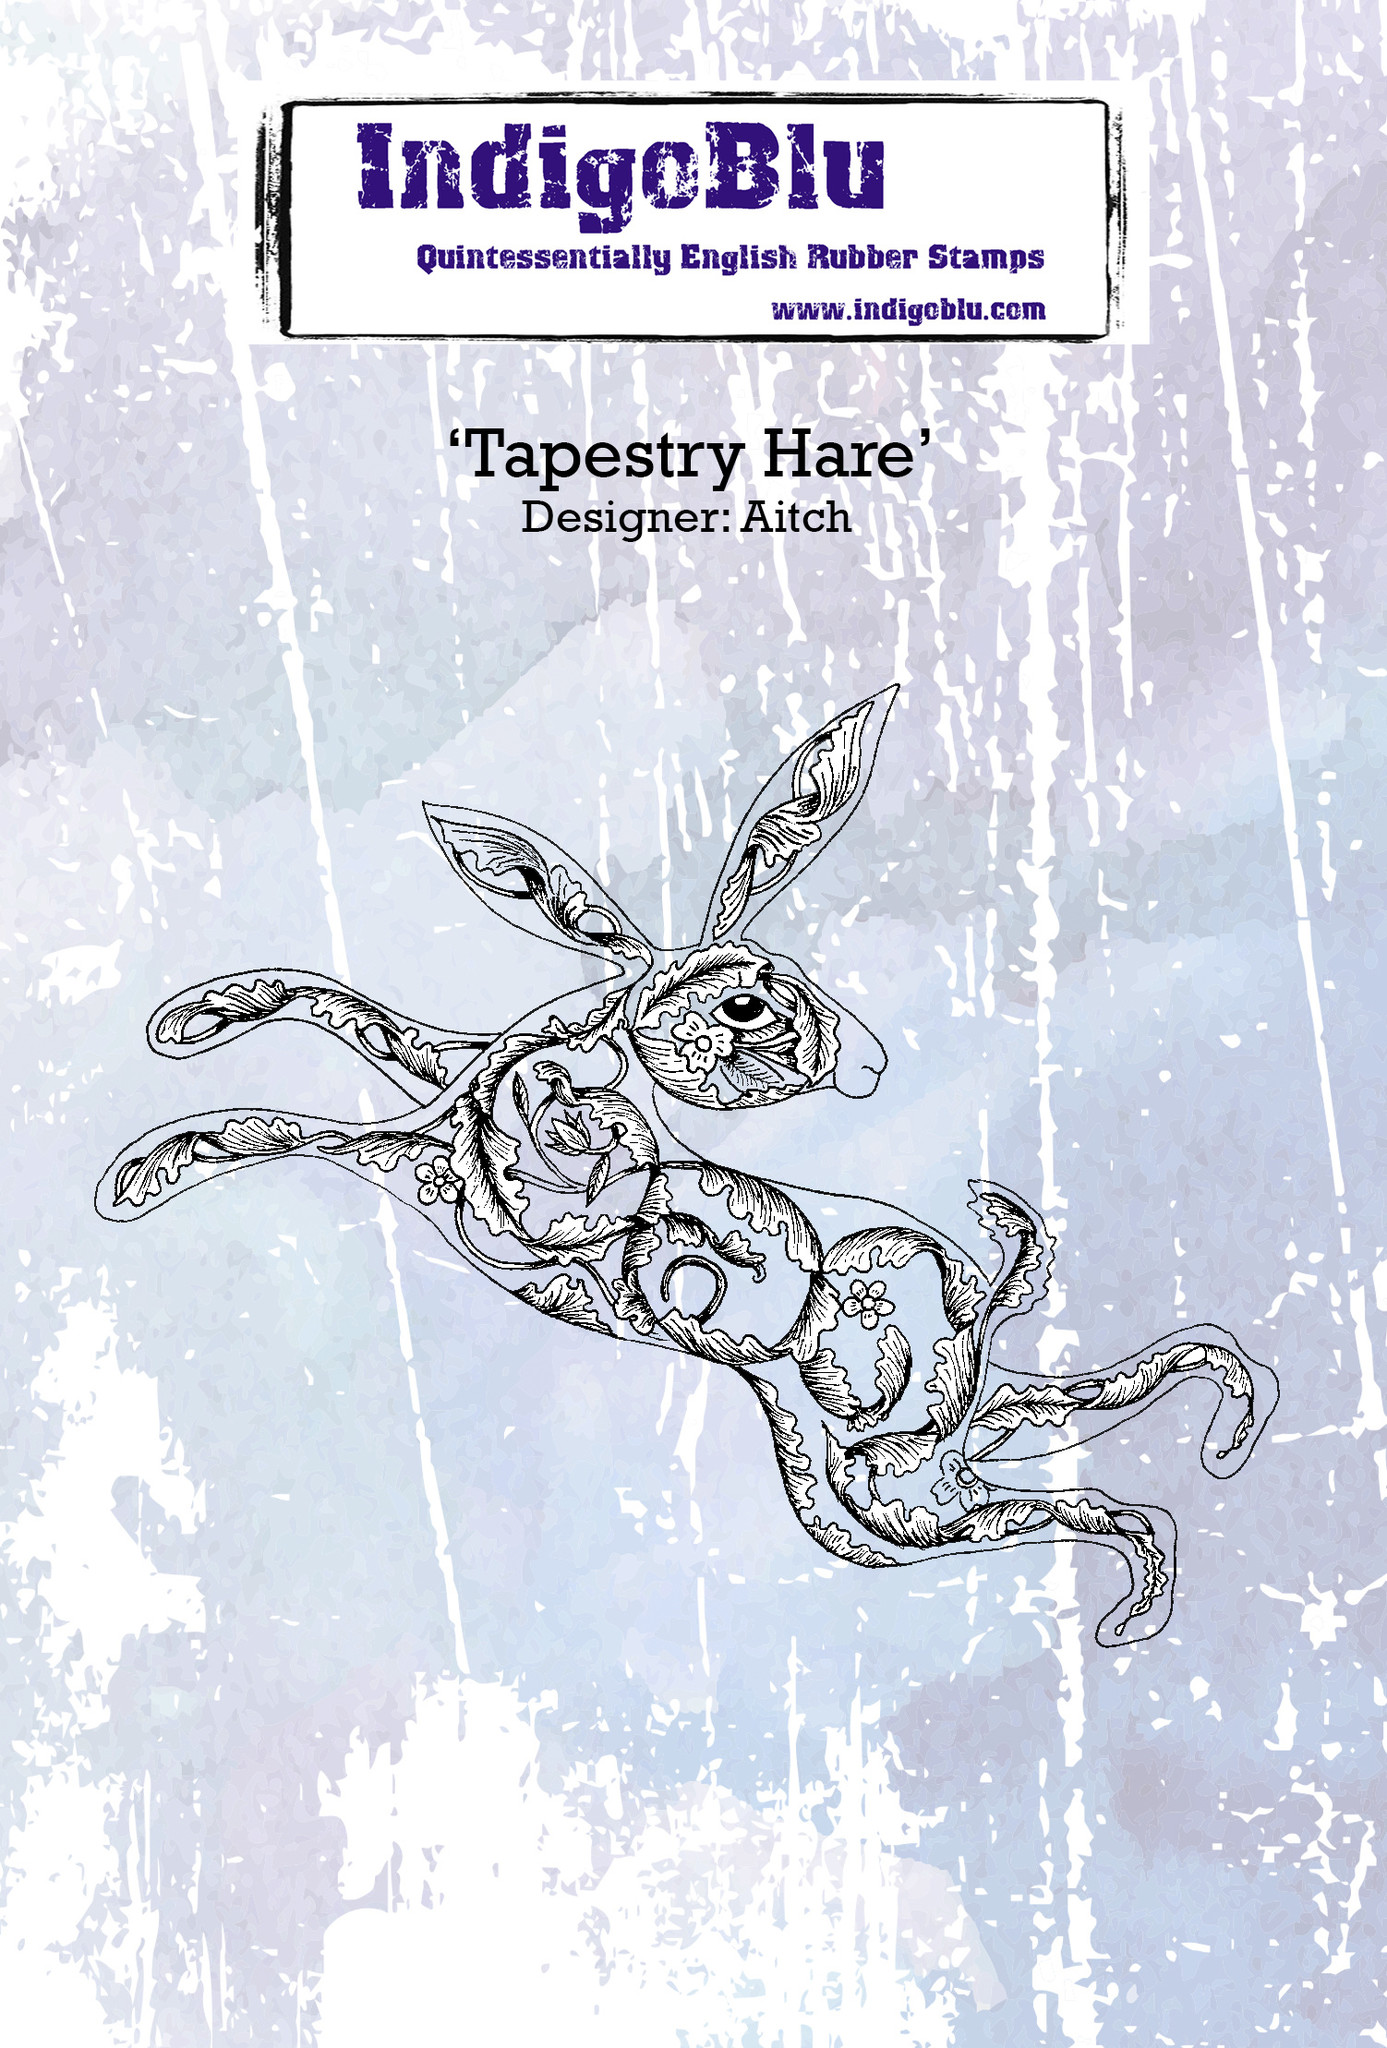 indigoblu-tapestry-hare-a6-rubber-stamp-ind0543